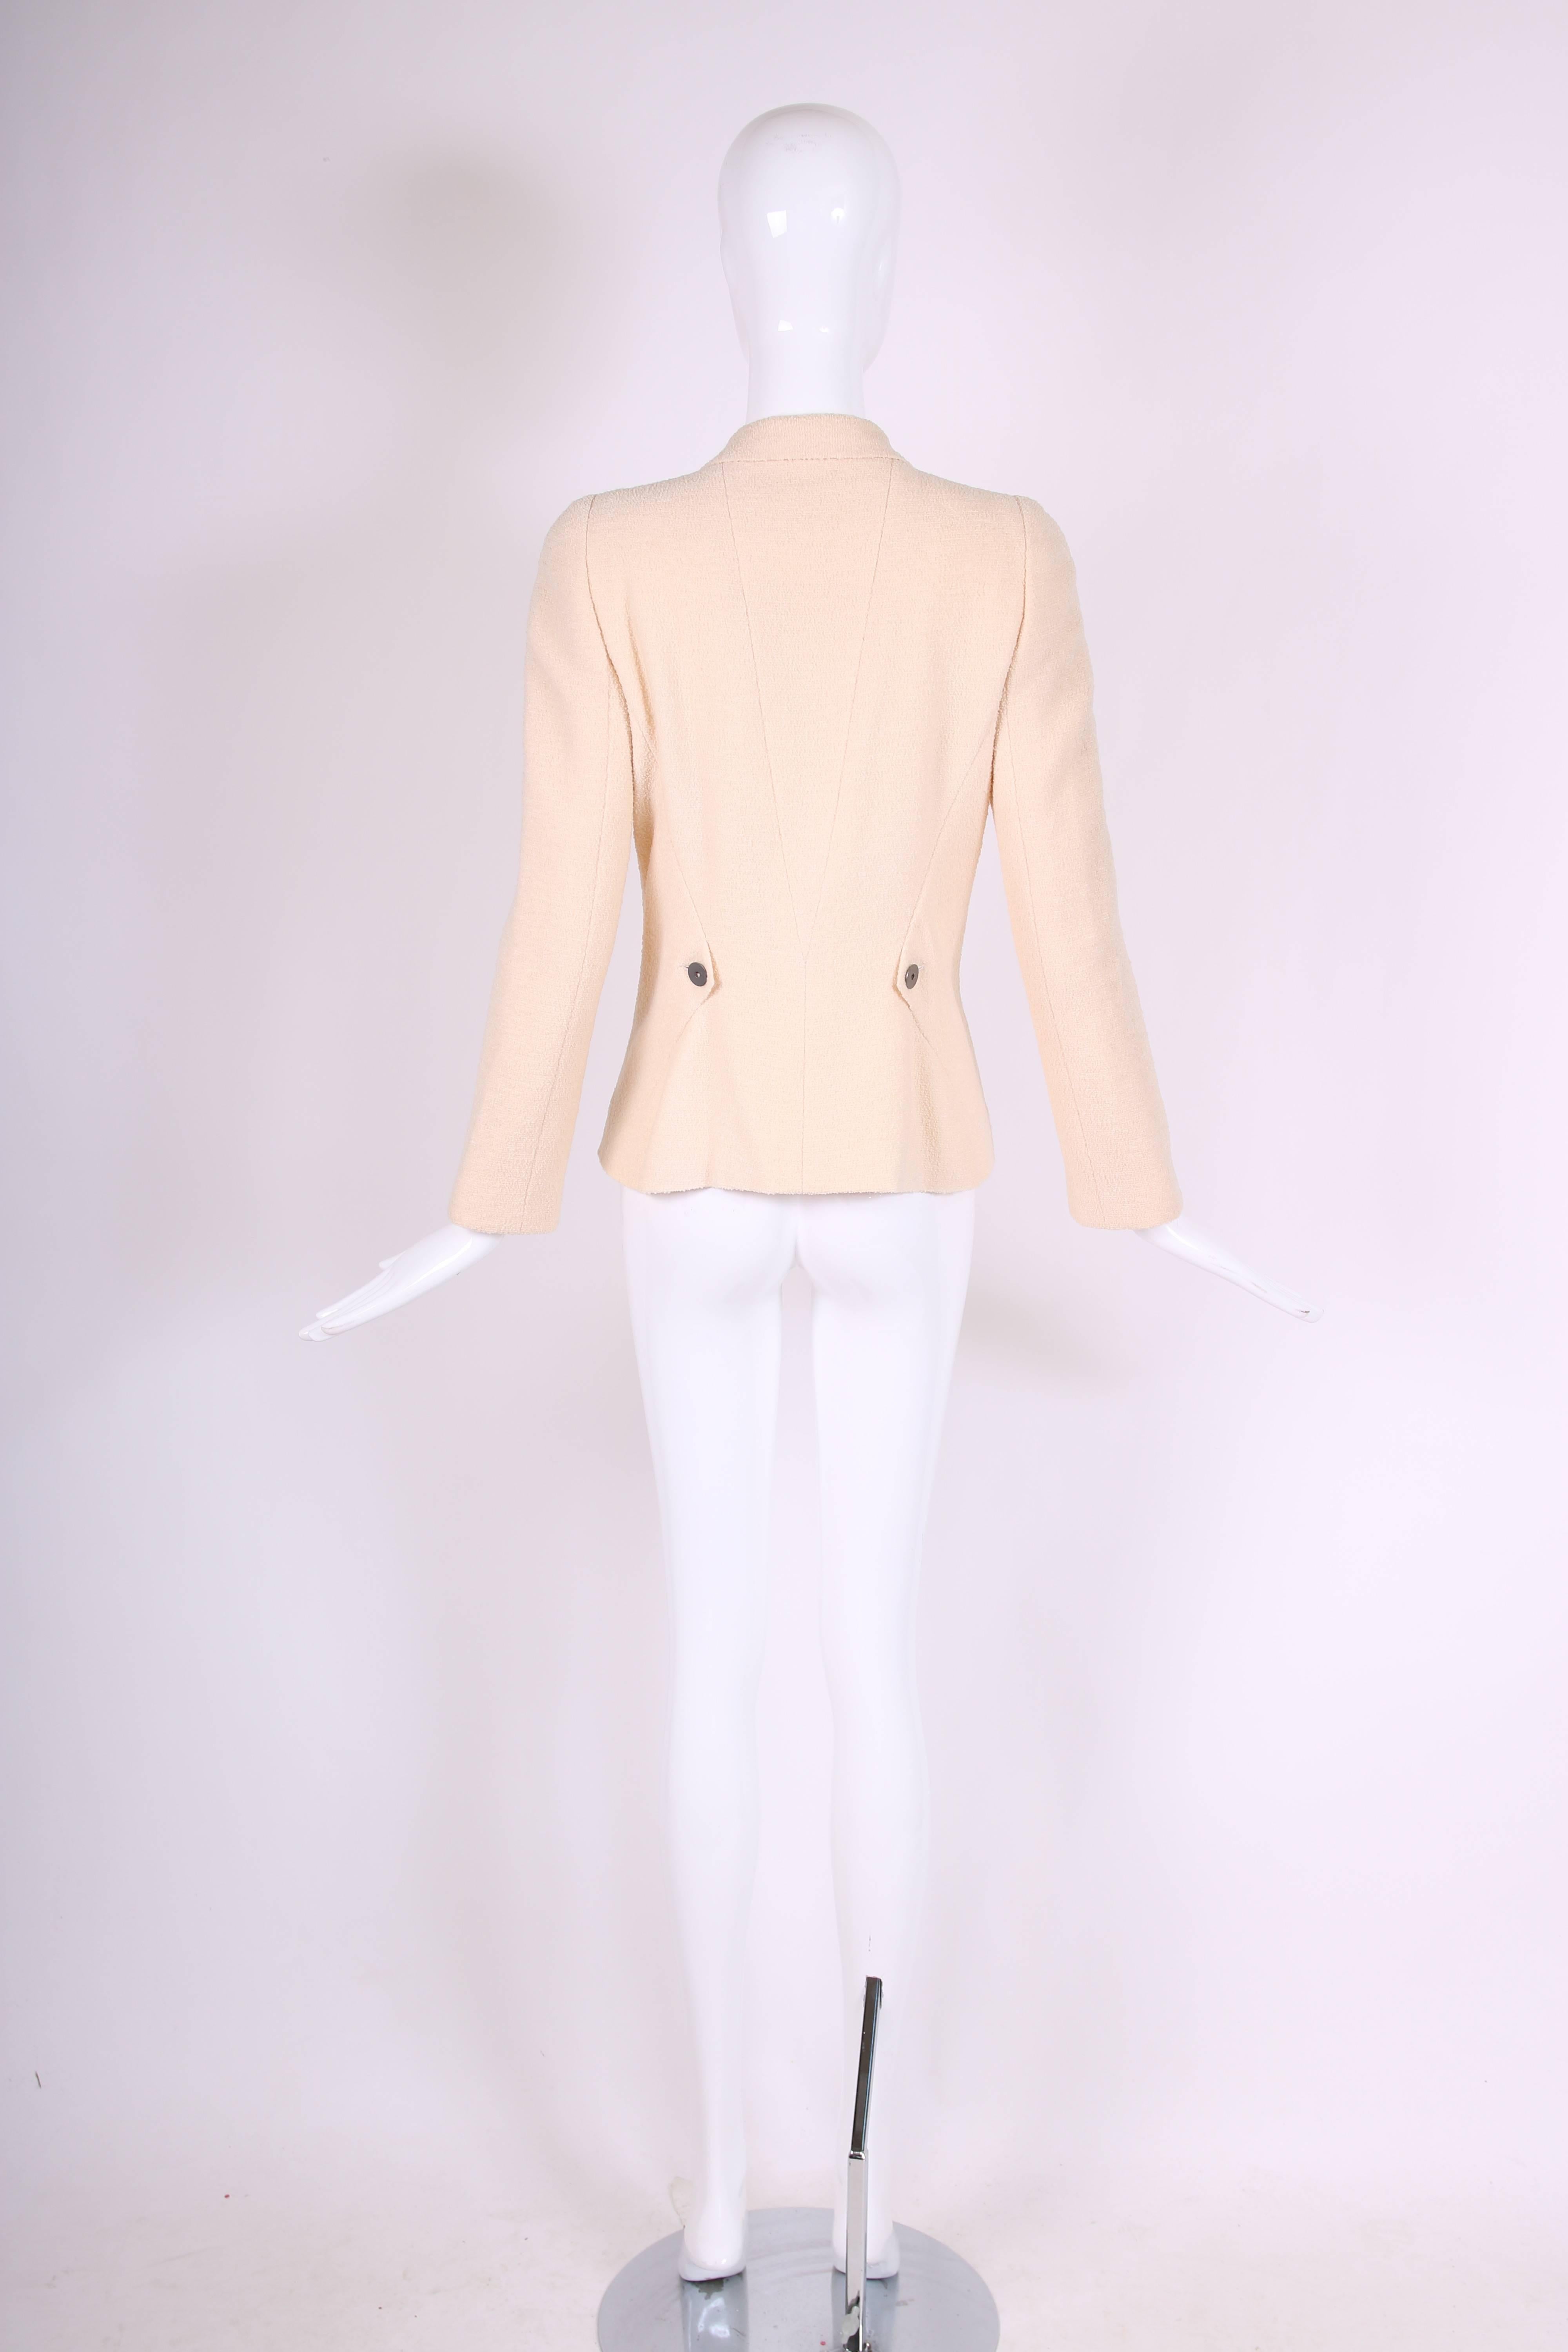 White Chanel Haute Couture Boucle Jacket with Asymmetric Design and Matching Skirt  